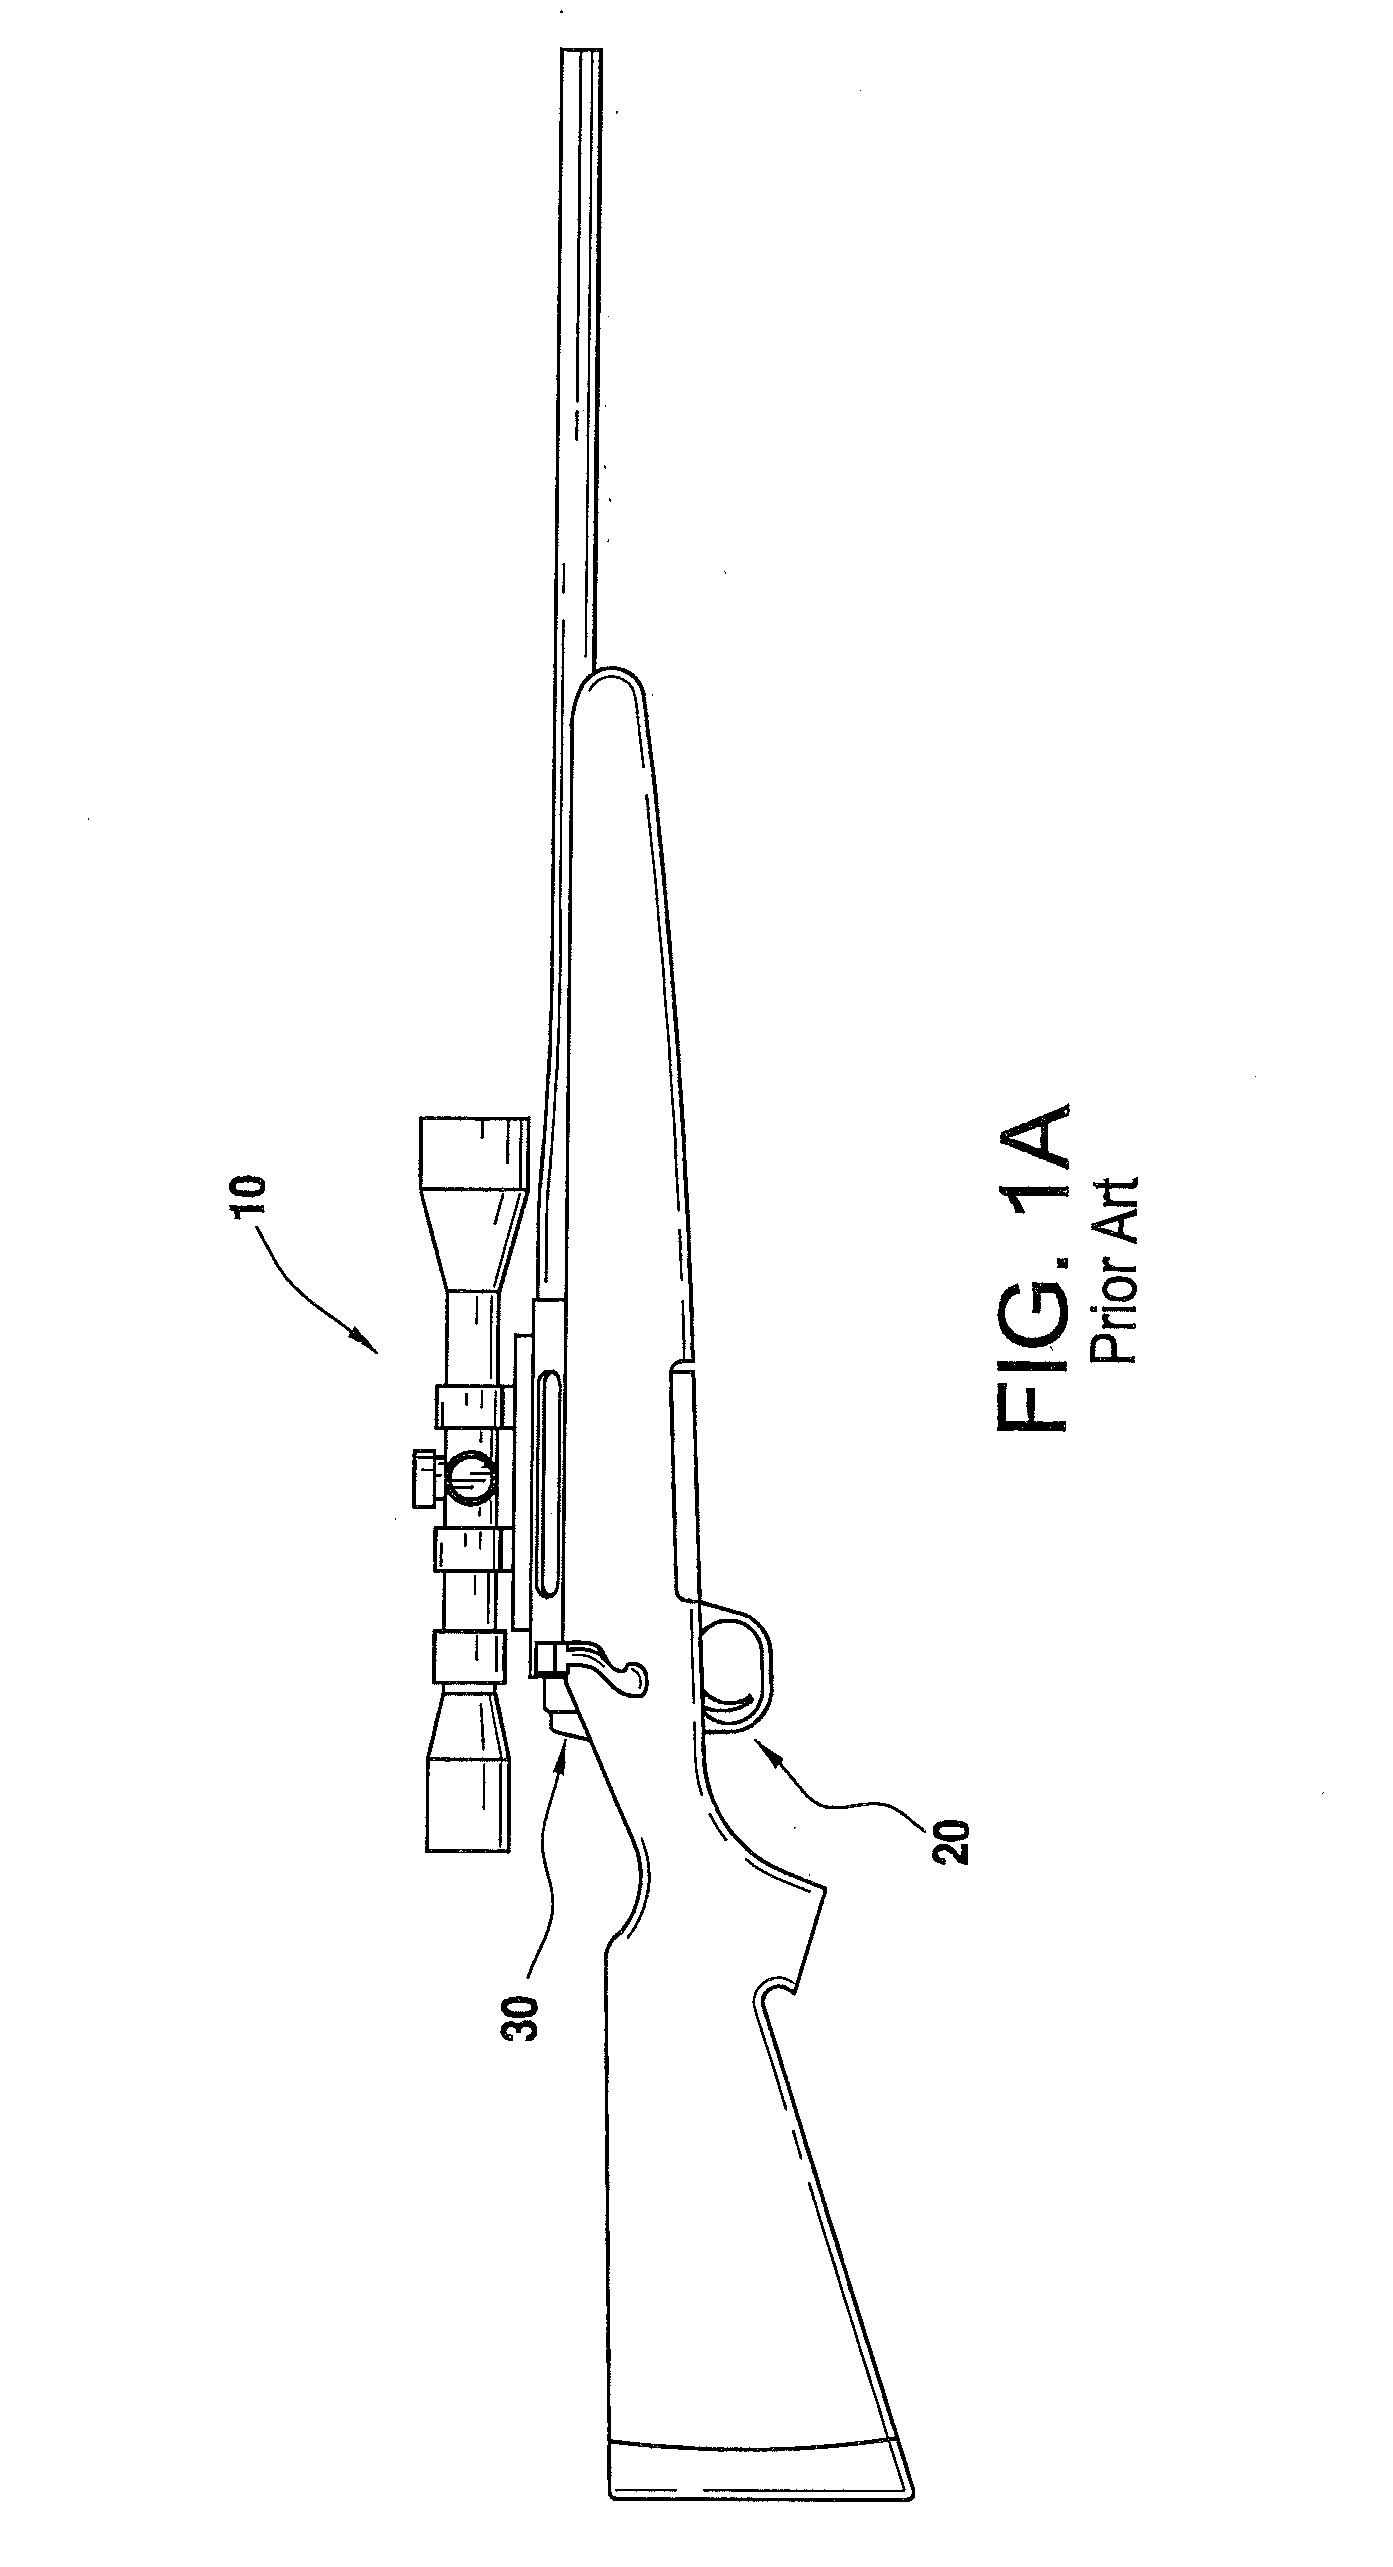 Drop-in Adjustable Trigger Assembly with Camming Safety Linkage